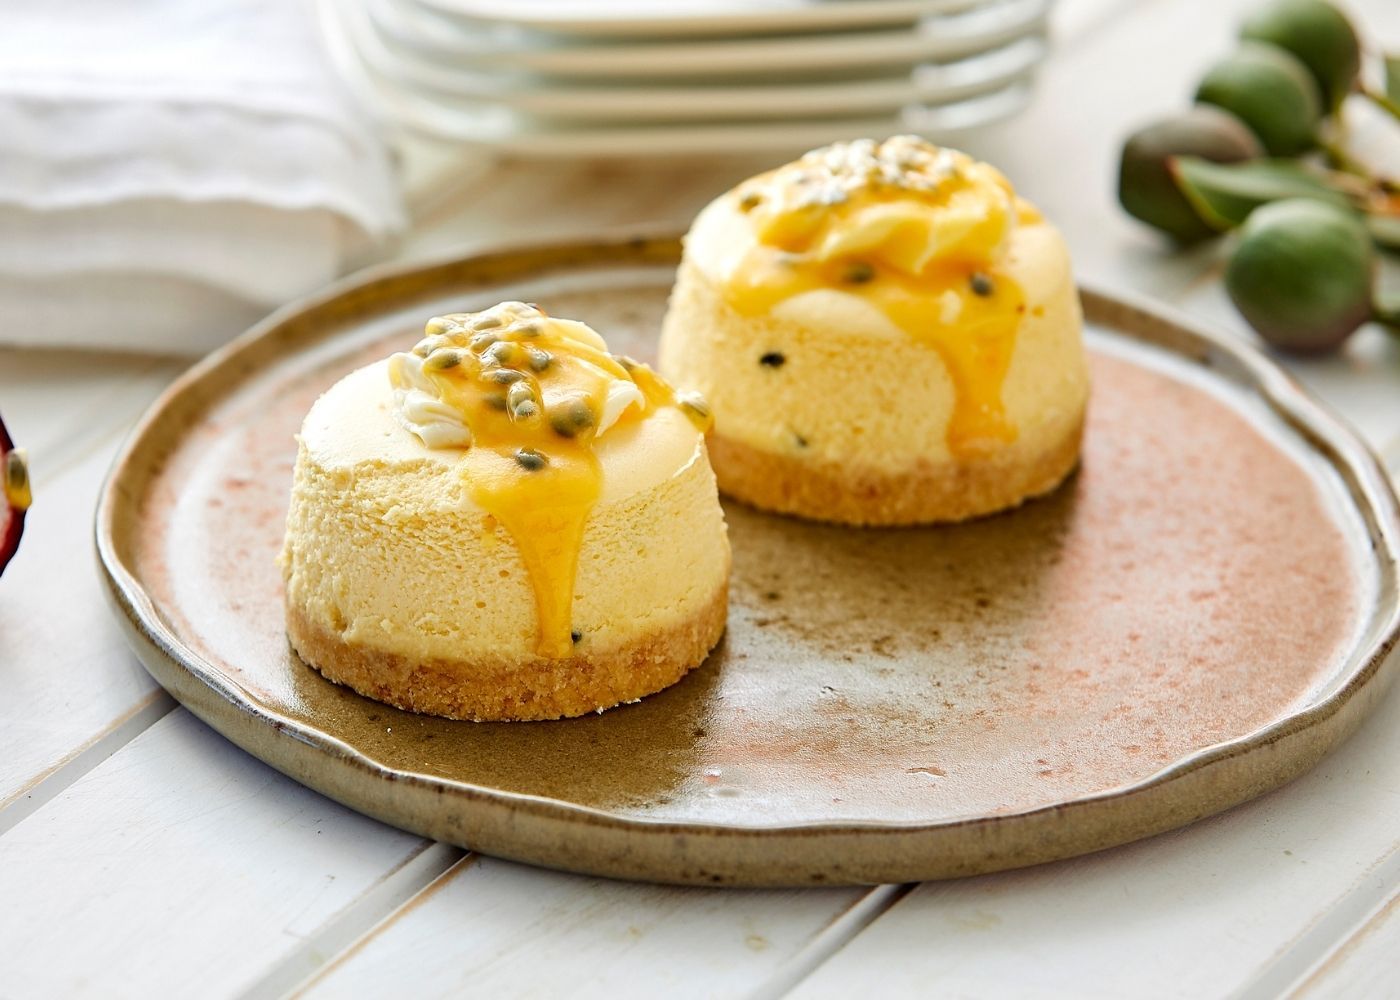 Baked passionfruit cheesecake